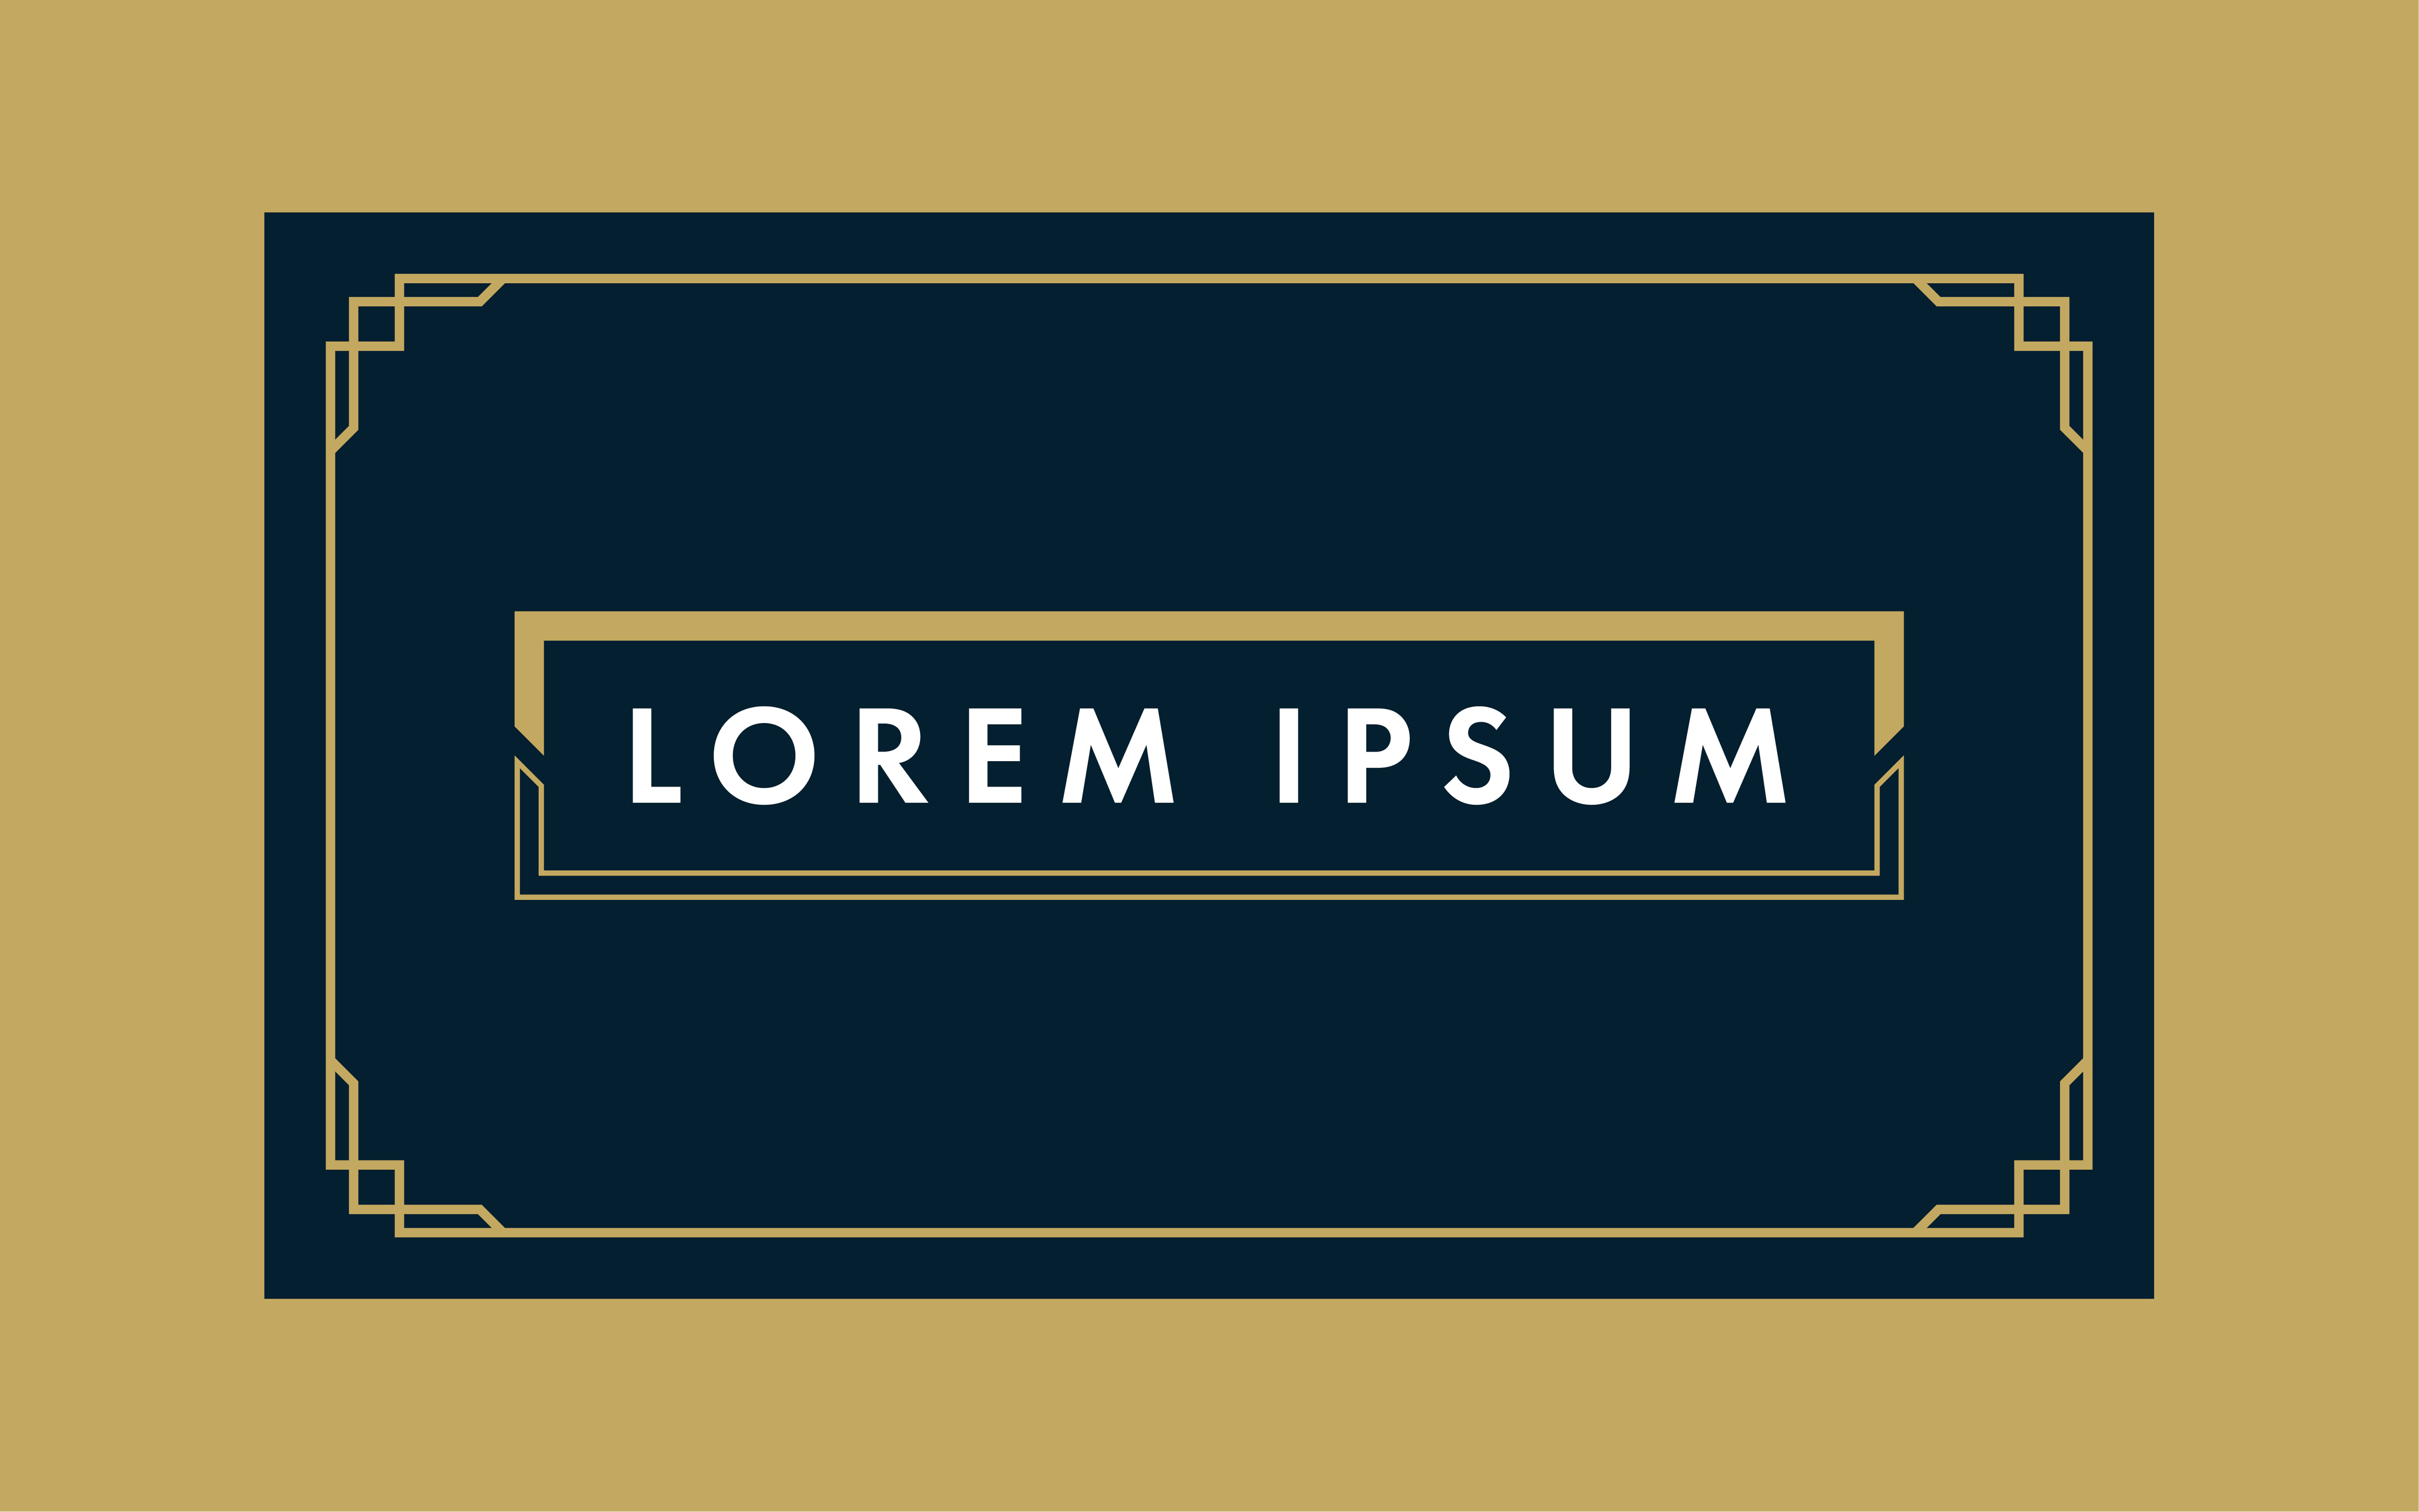  Lorem ipsum what is it : The Essential Guide to Understanding and Using